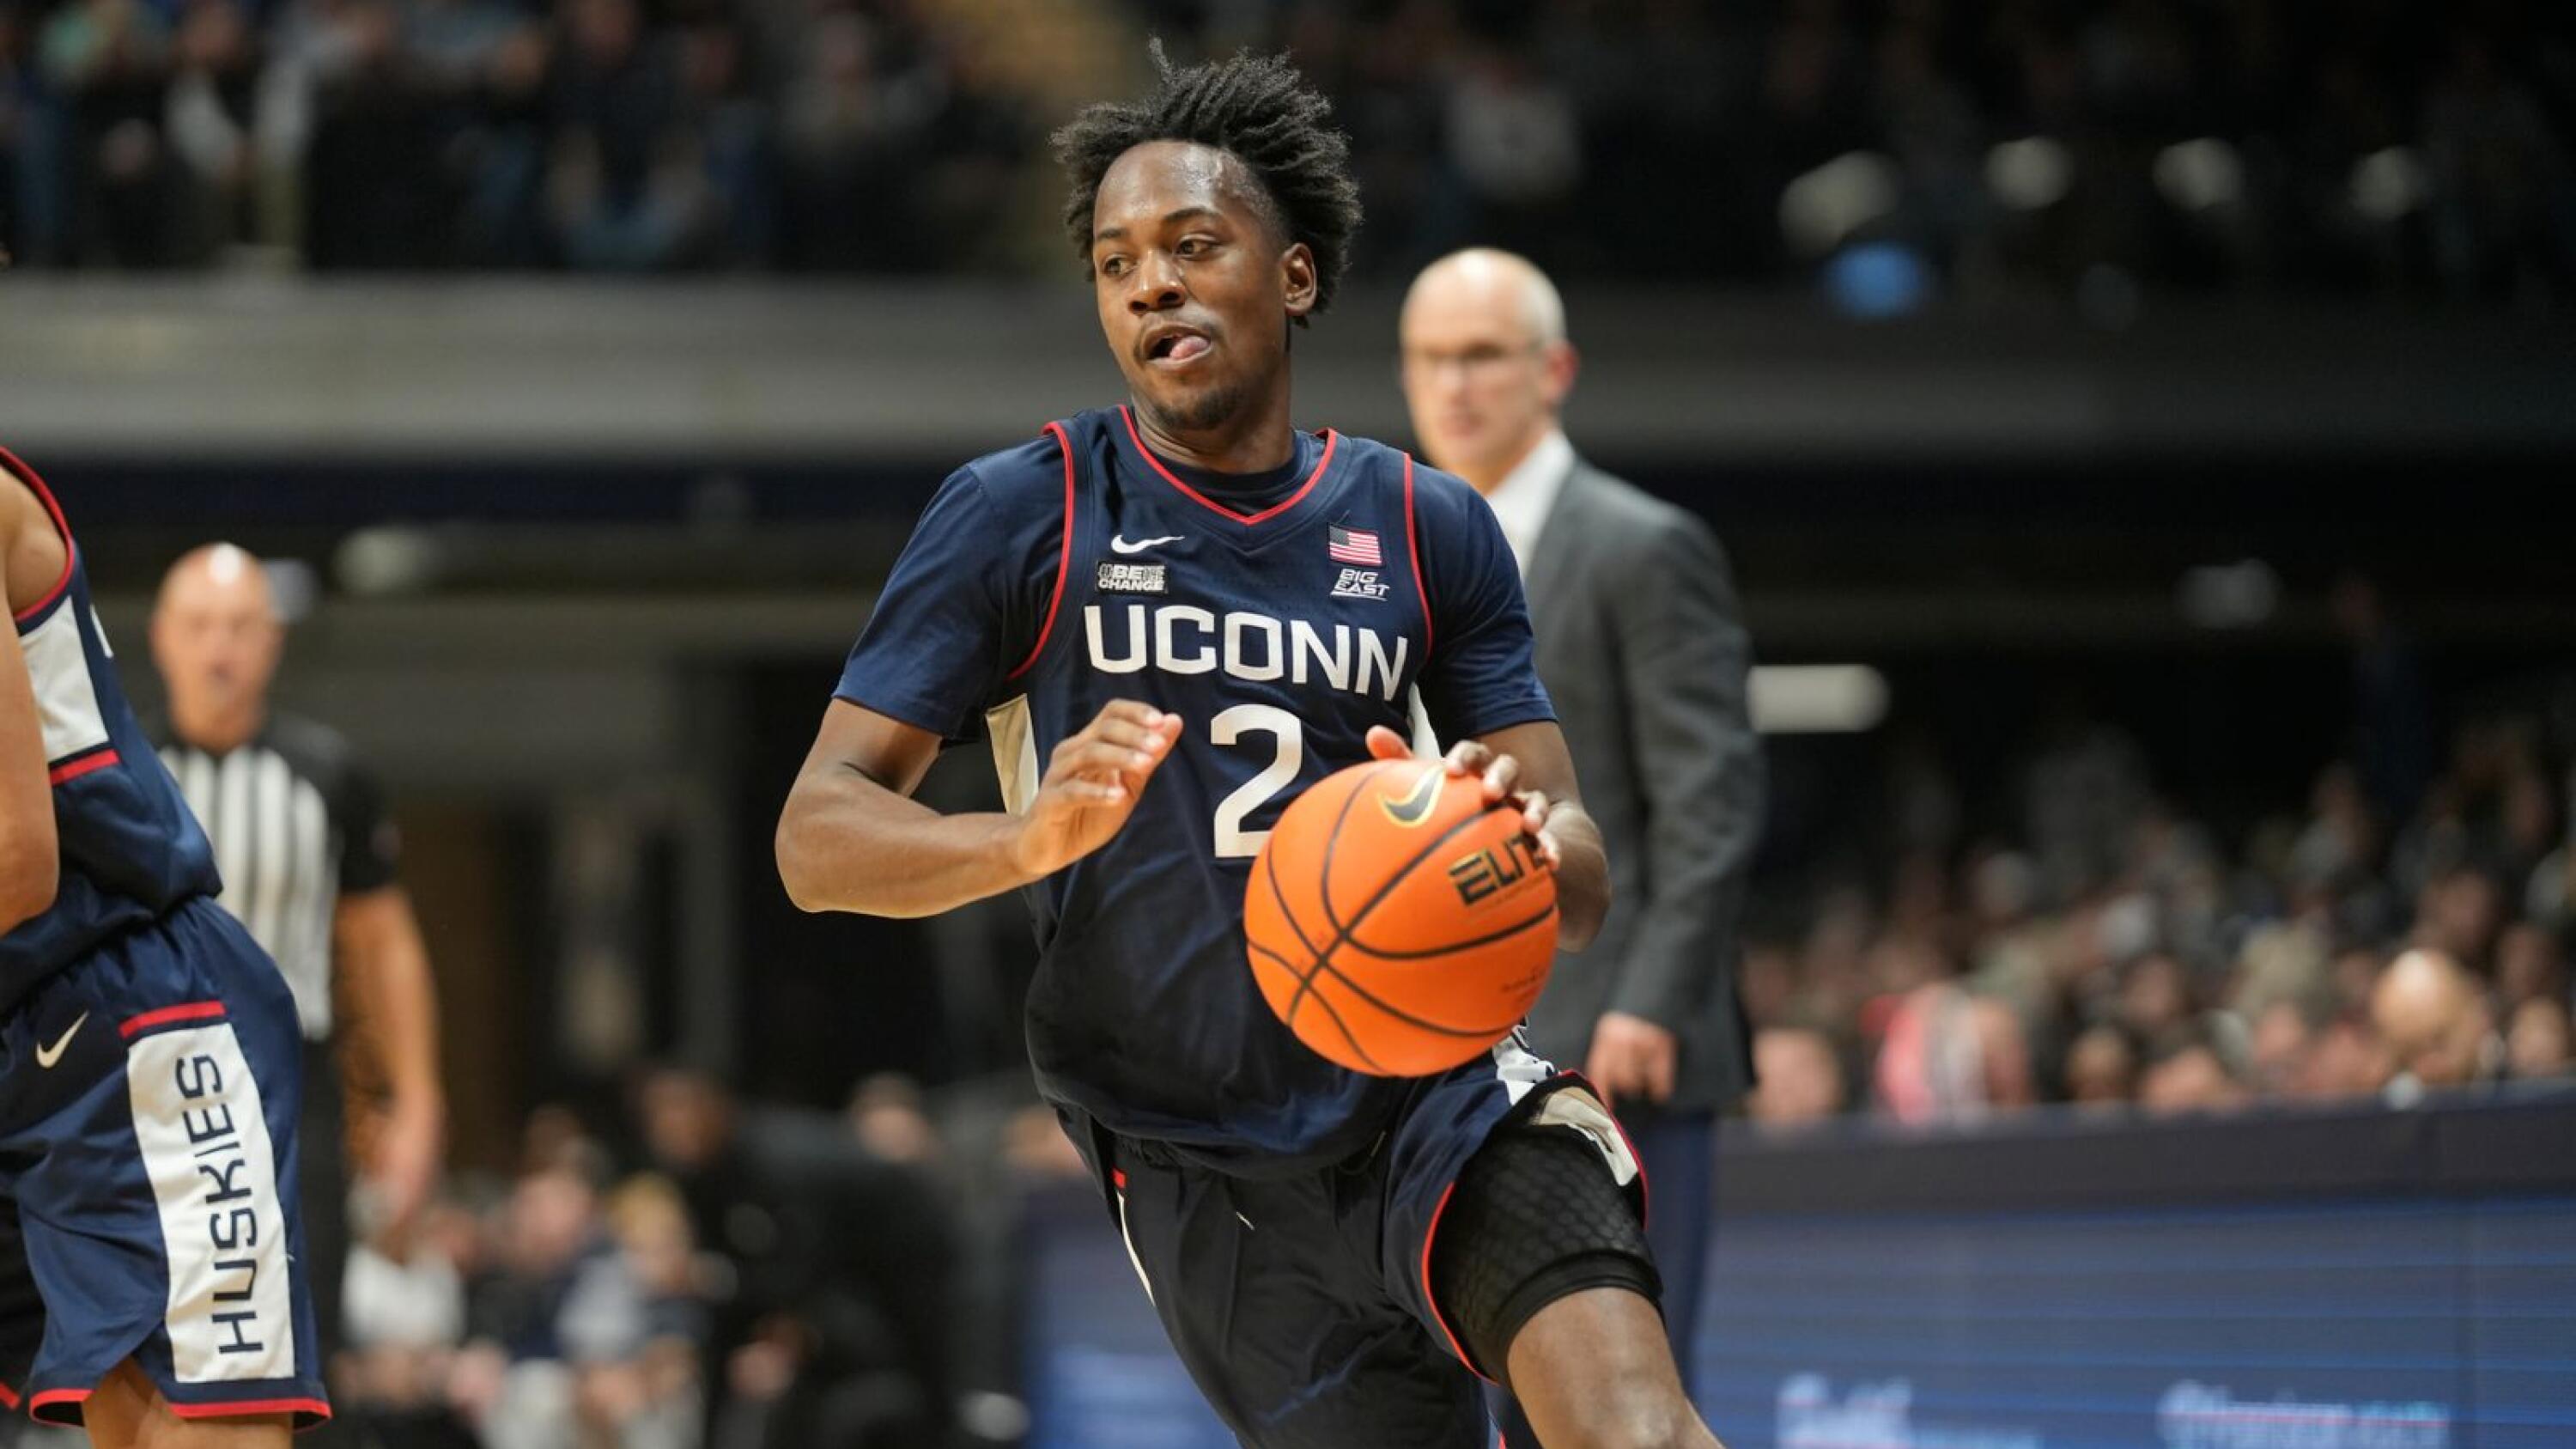 Here are most impactful Huskies in history of UConn men's basketball